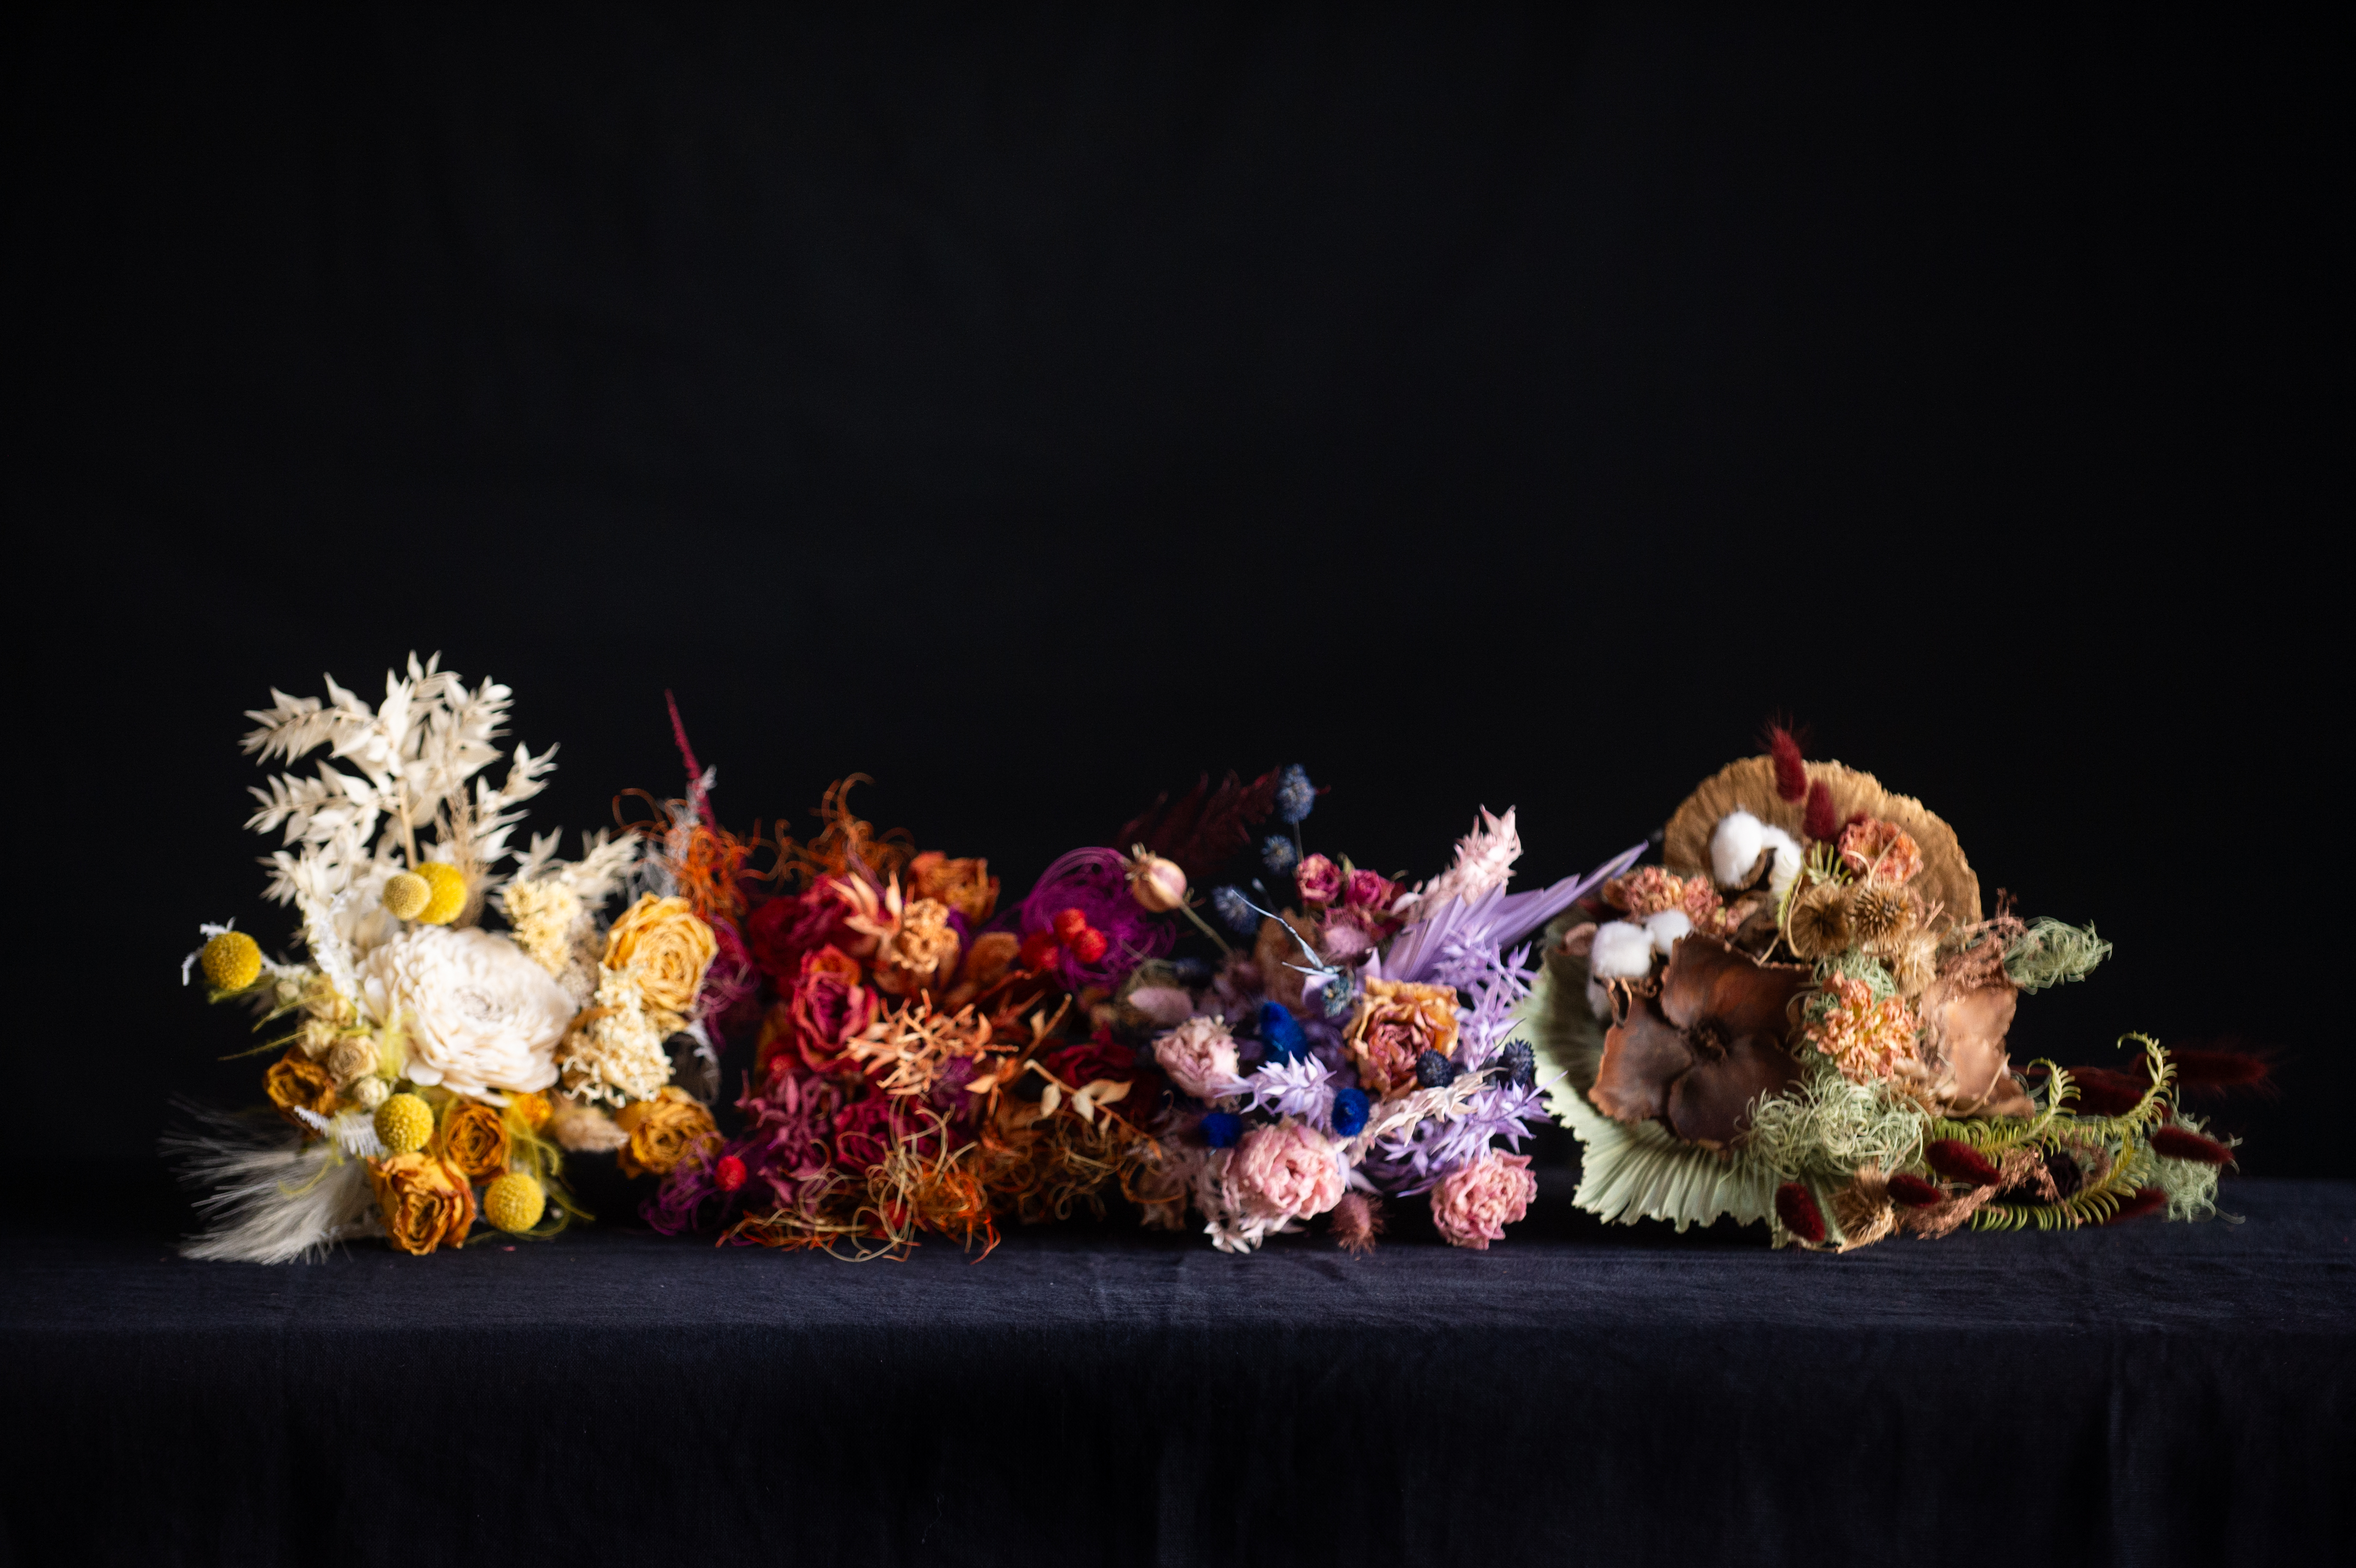 Floral bouquets of dried and preserved stems that last forever